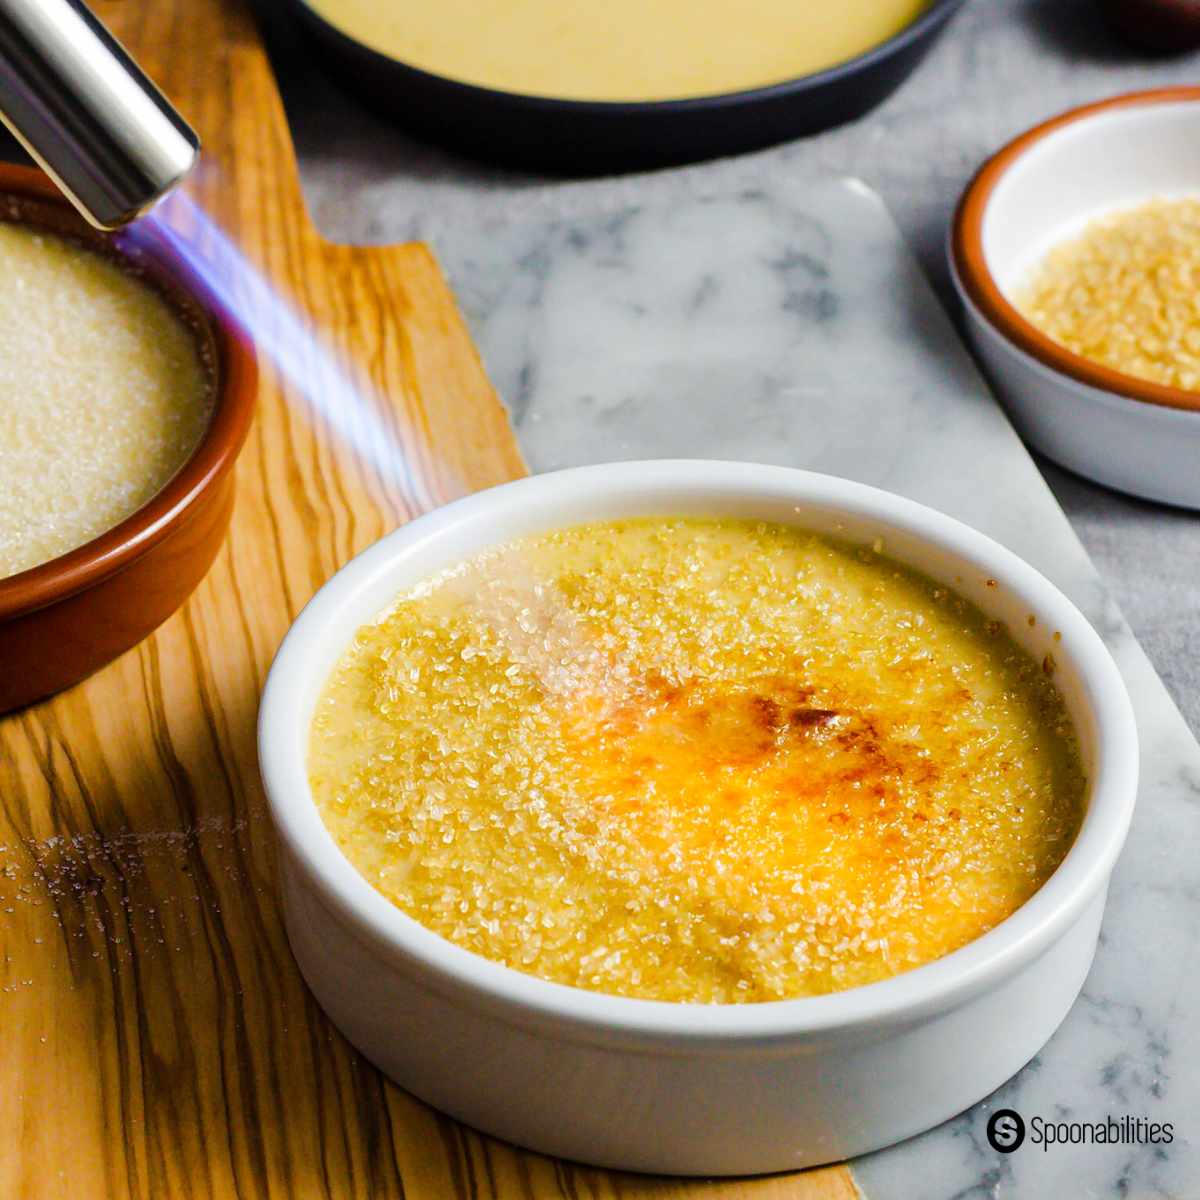 Caramelizing the sugar on top of the creme brulee with a kitchen torch